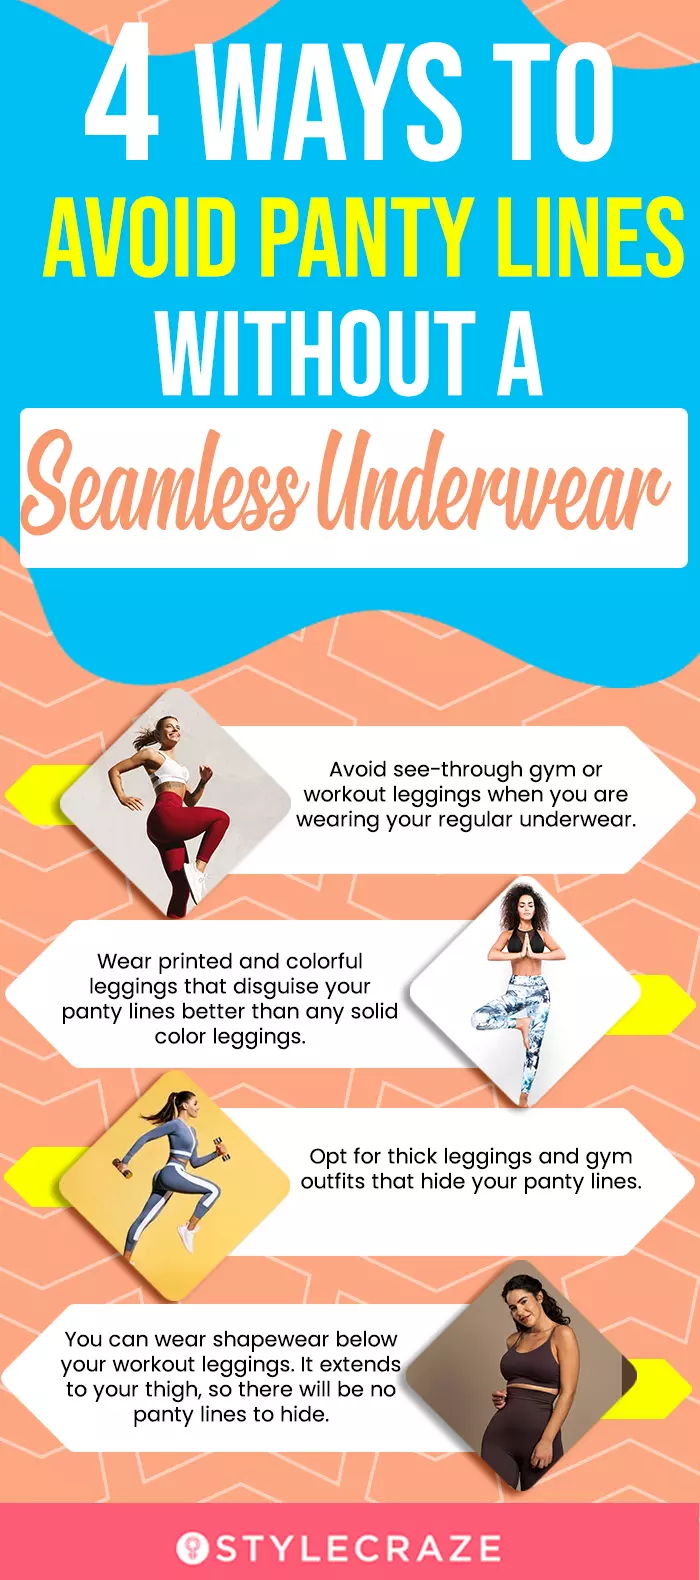 Ways To Avoid Panty Lines (infographic)